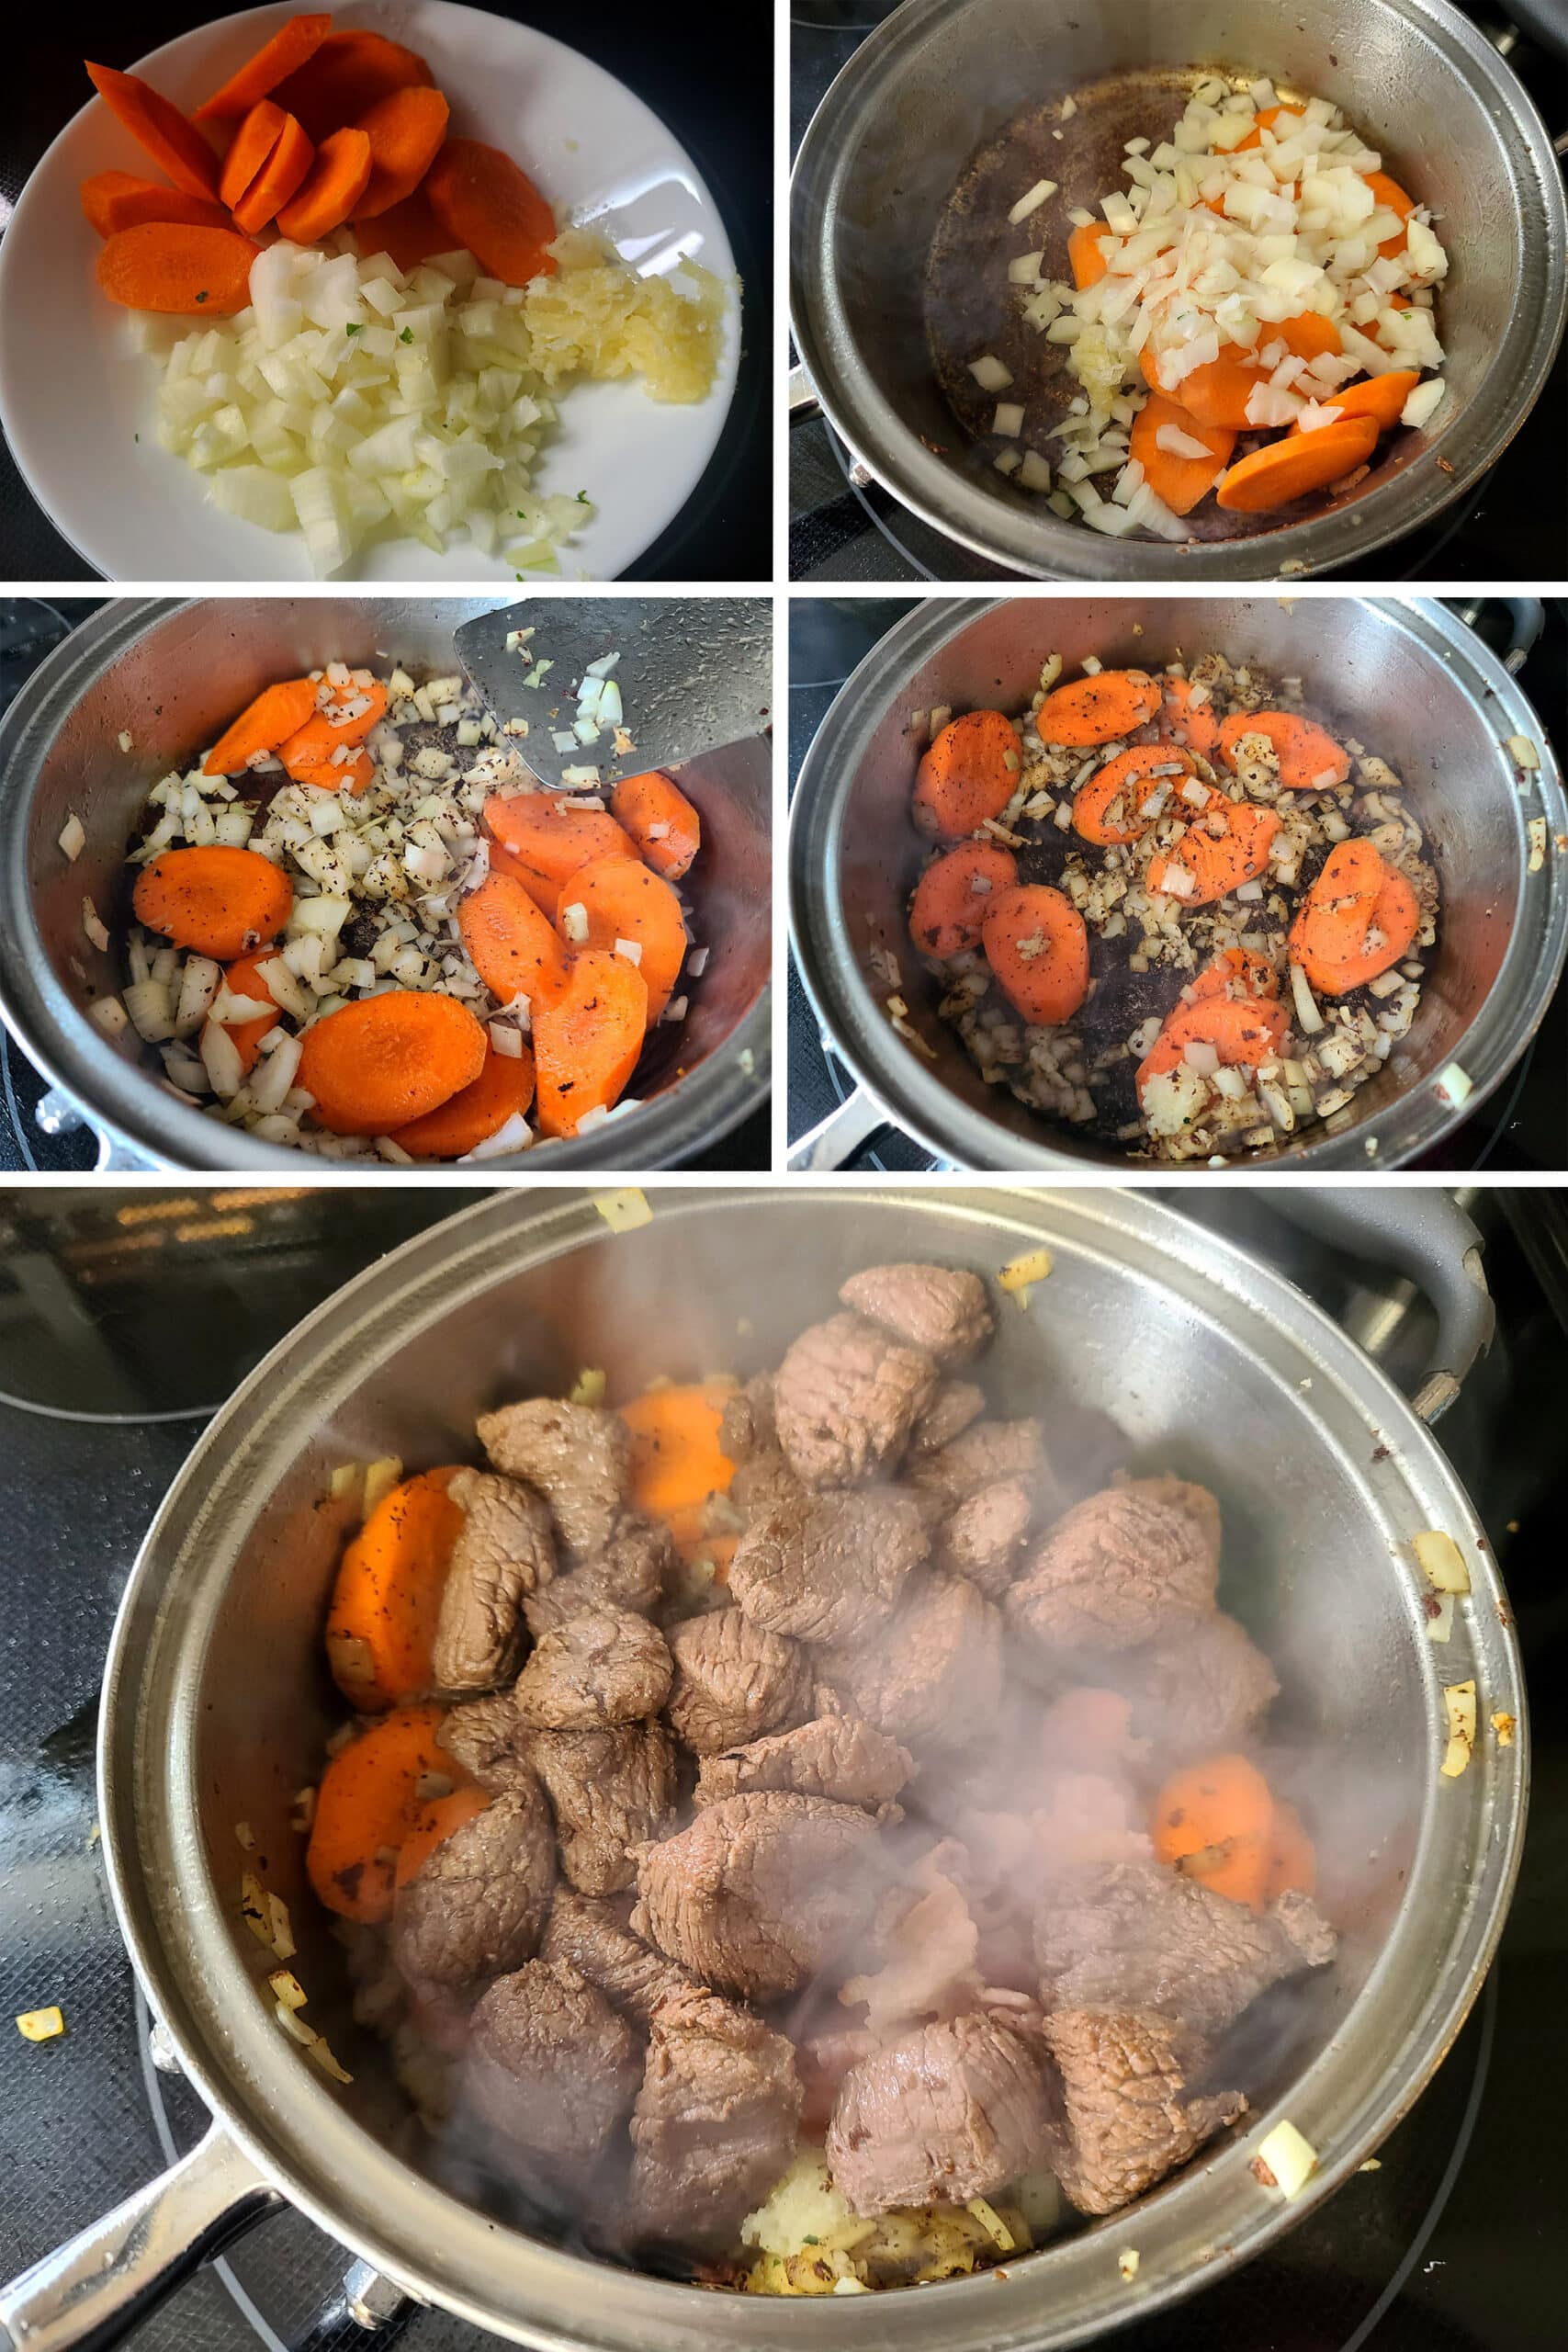 A 5 part image showing the vegetables being cooked in the pot and the meats being added back to the pot.